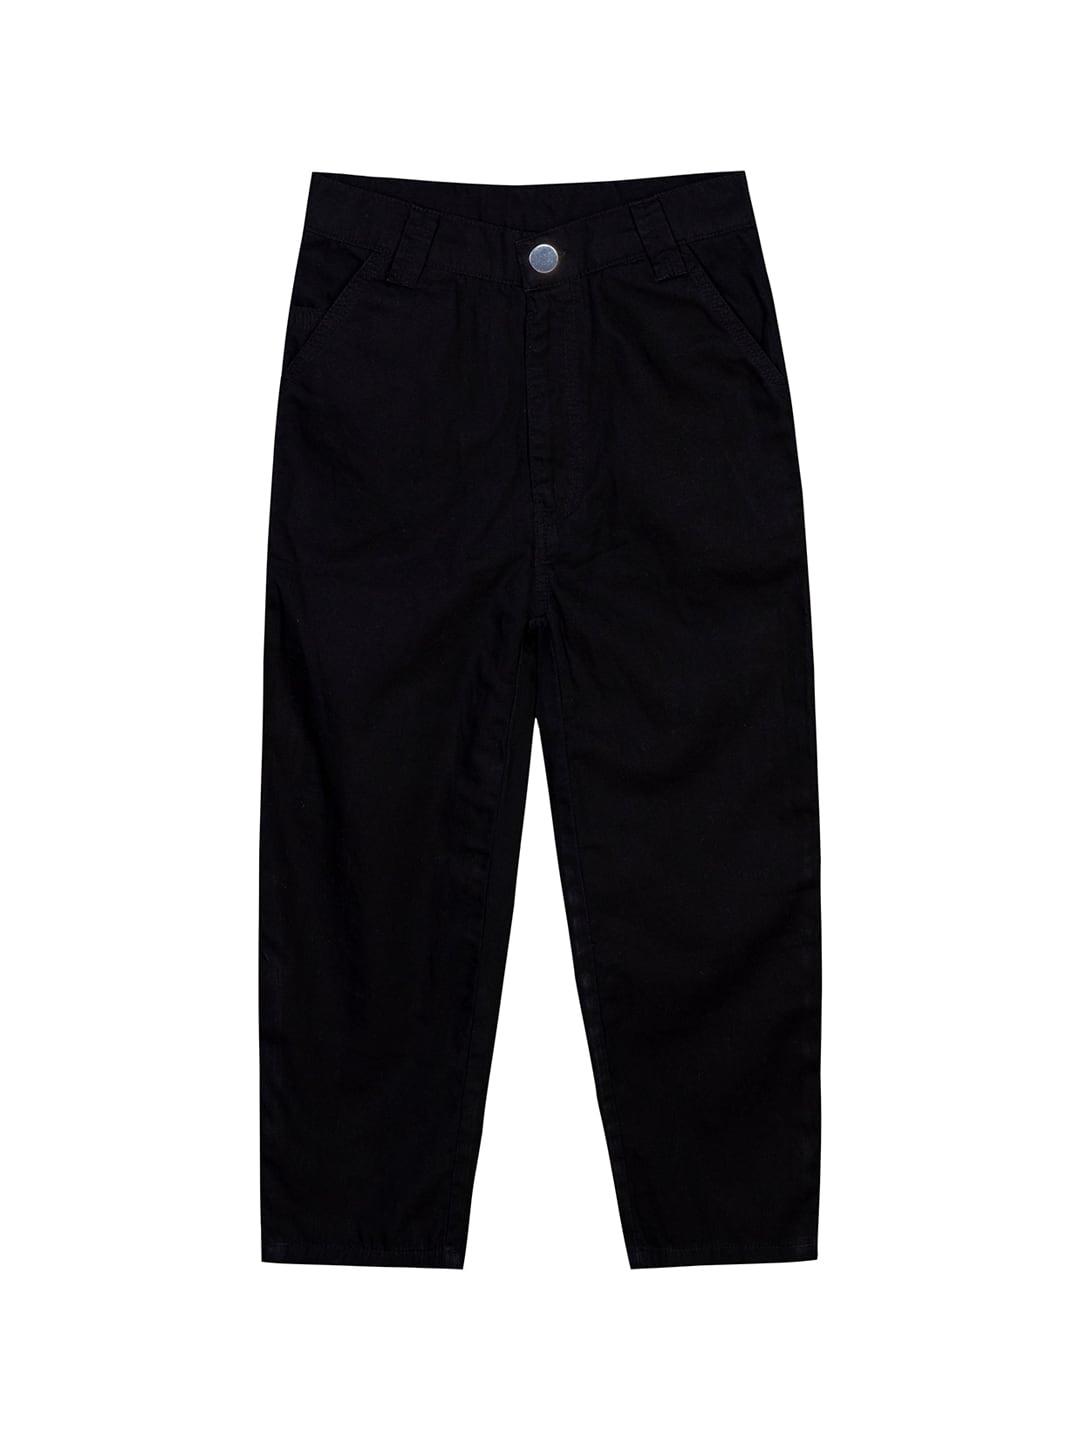 Budding Bees Boys Black Relaxed Chinos Trousers